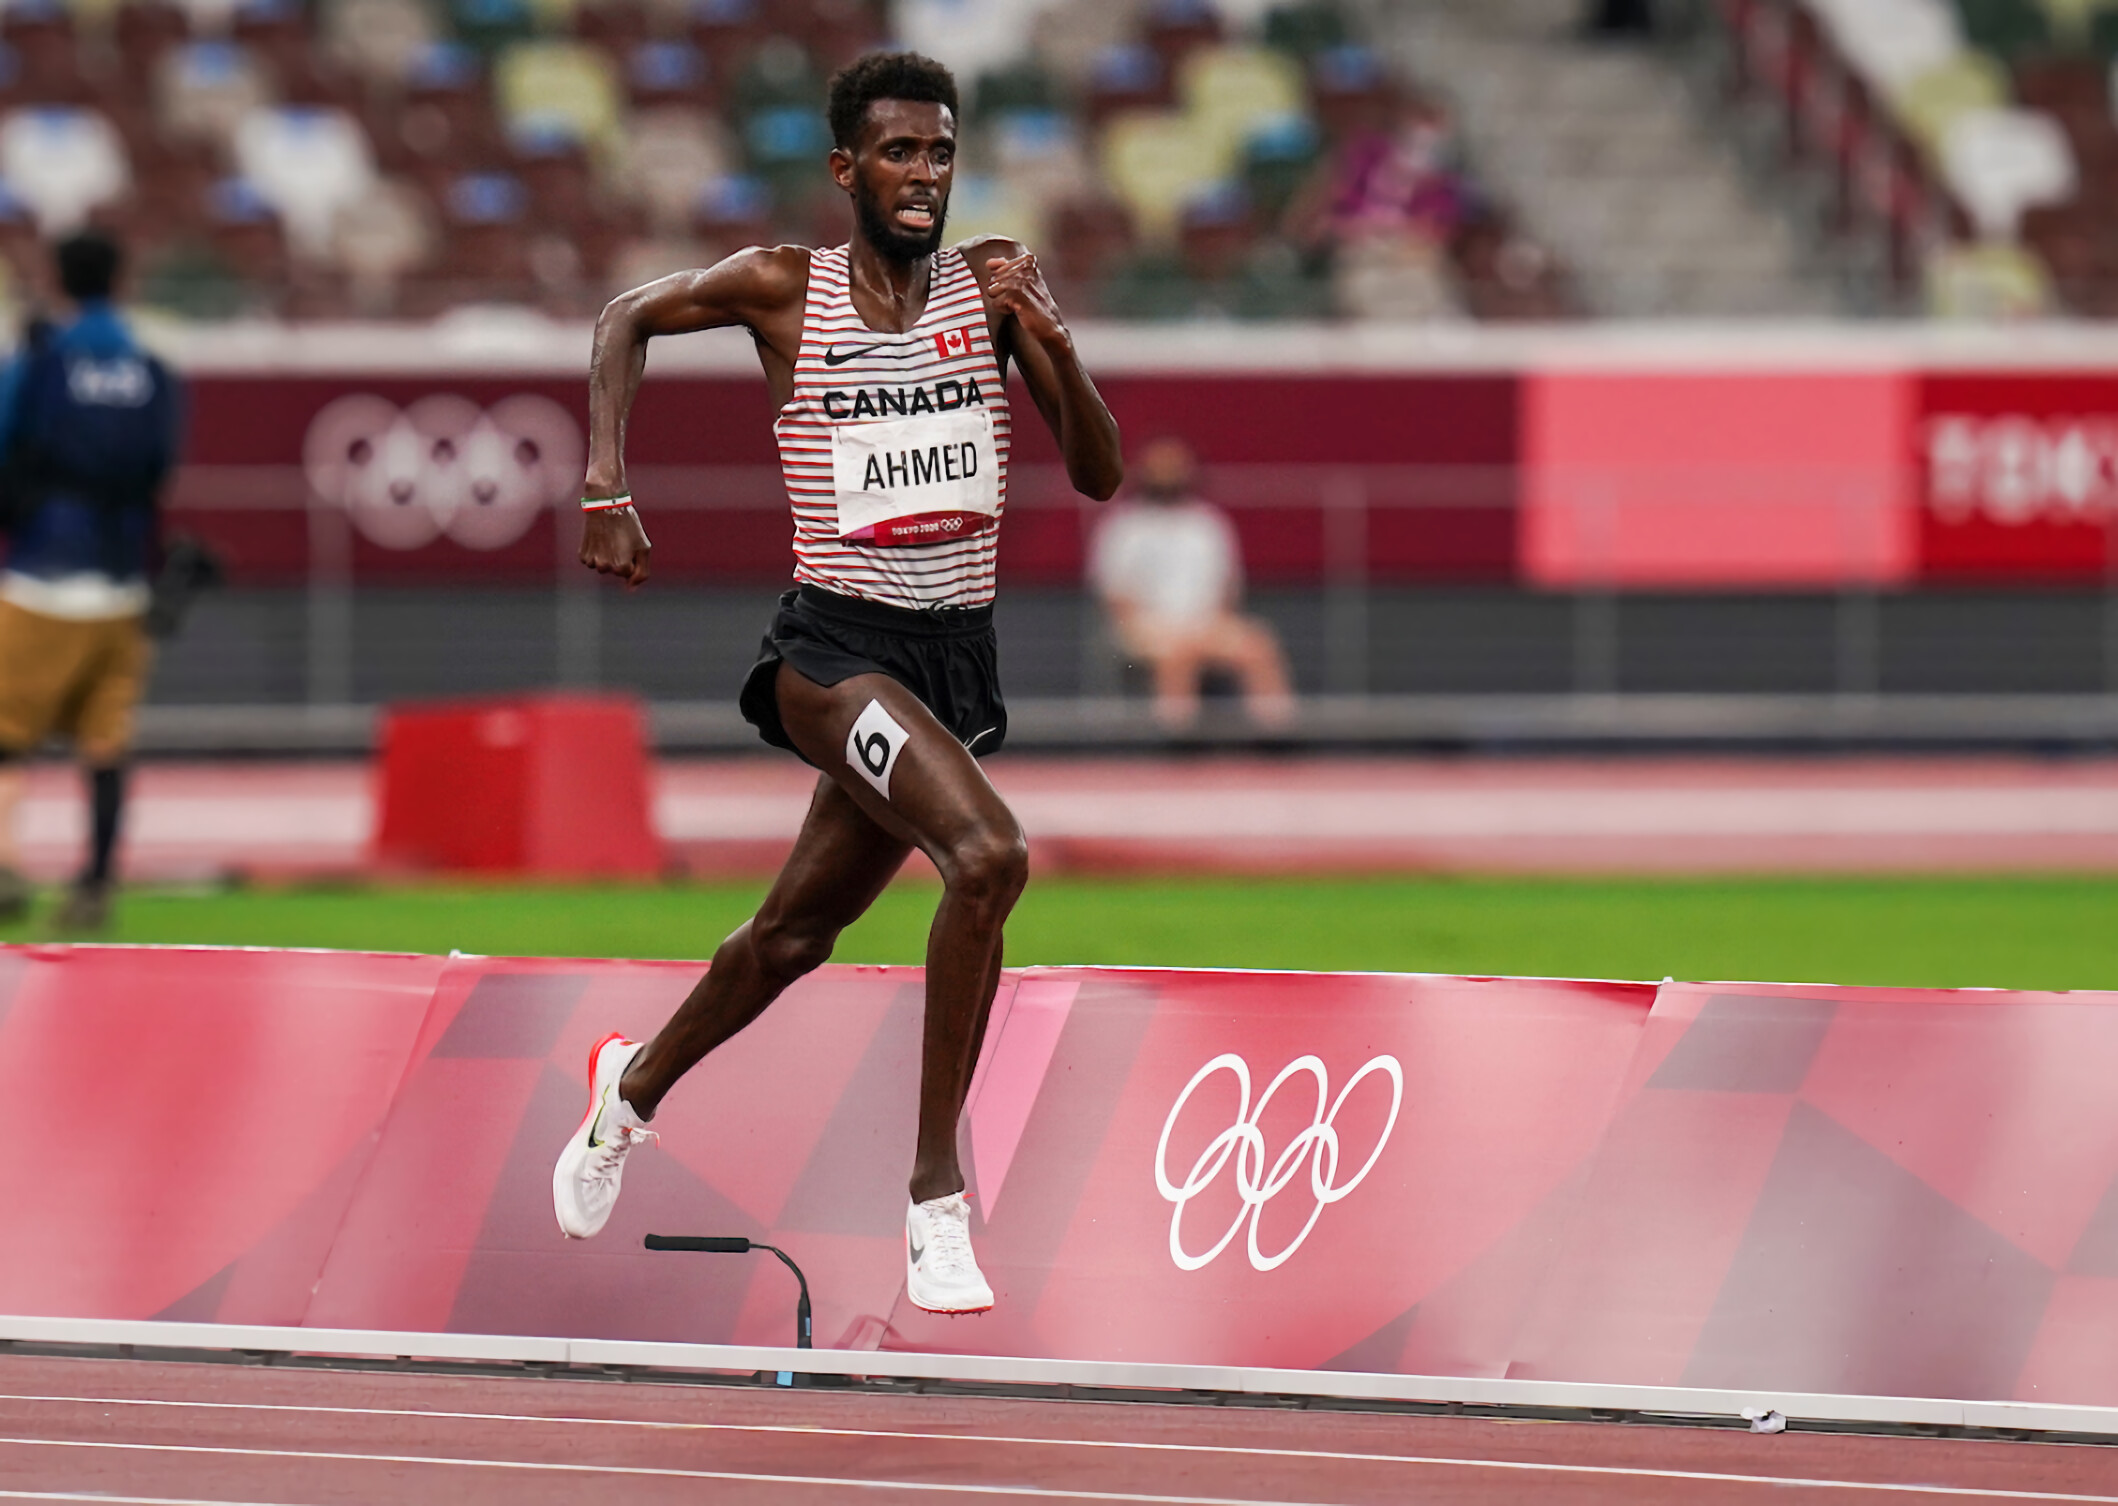 Mohammed Ahmed, Track and field skills, Endurance races, Championship dreams, 2120x1510 HD Desktop